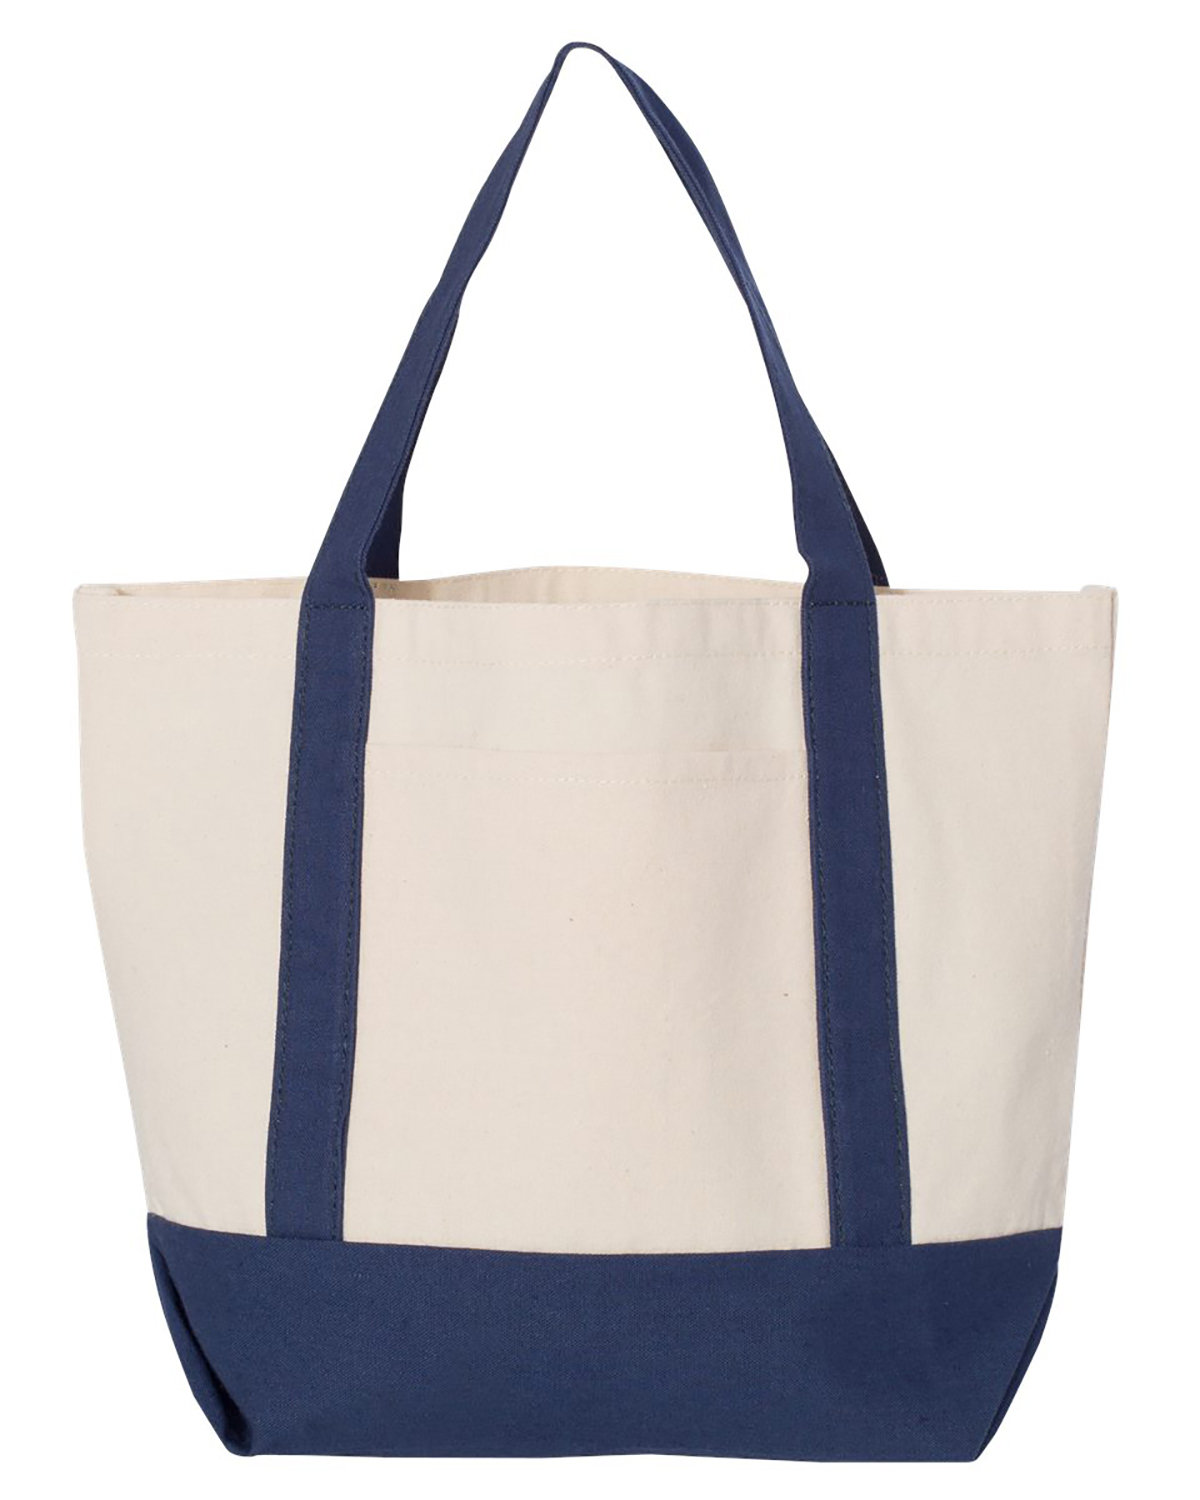 Liberty Bags Seaside Cotton Canvas Tote | alphabroder